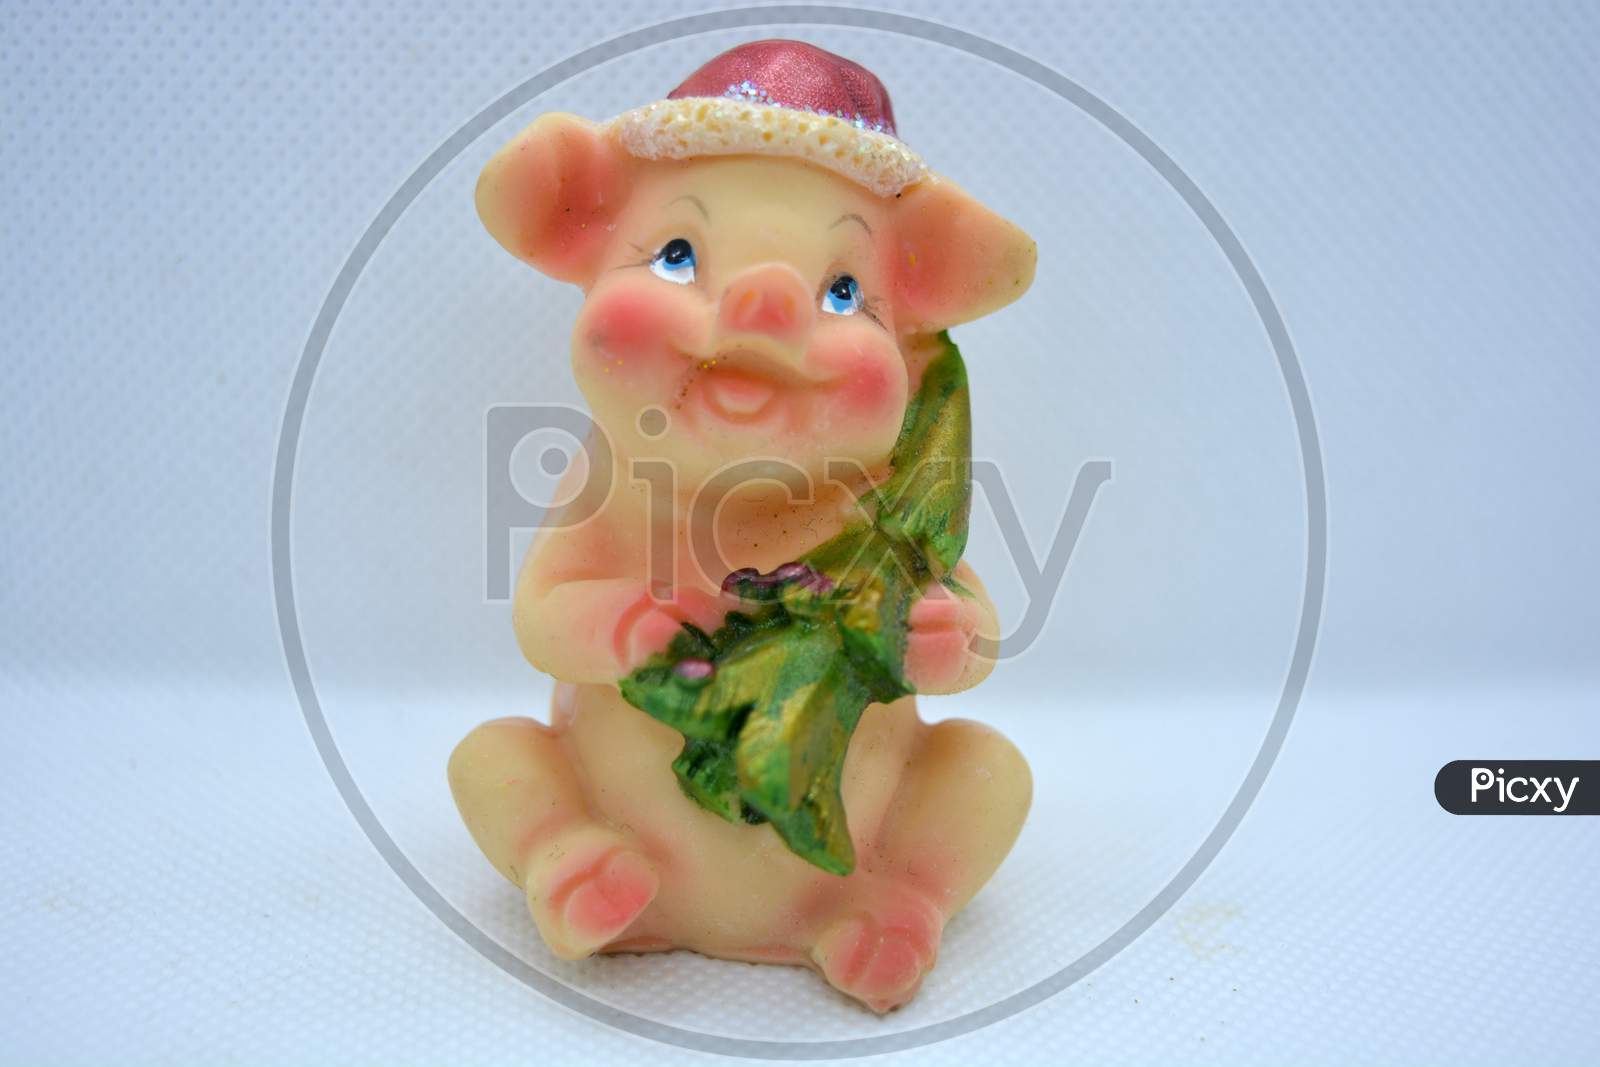 Bright and colorful figurine of a cheerful joyful piglet in a red Christmas hat and a bright green christmas tree in her hands.